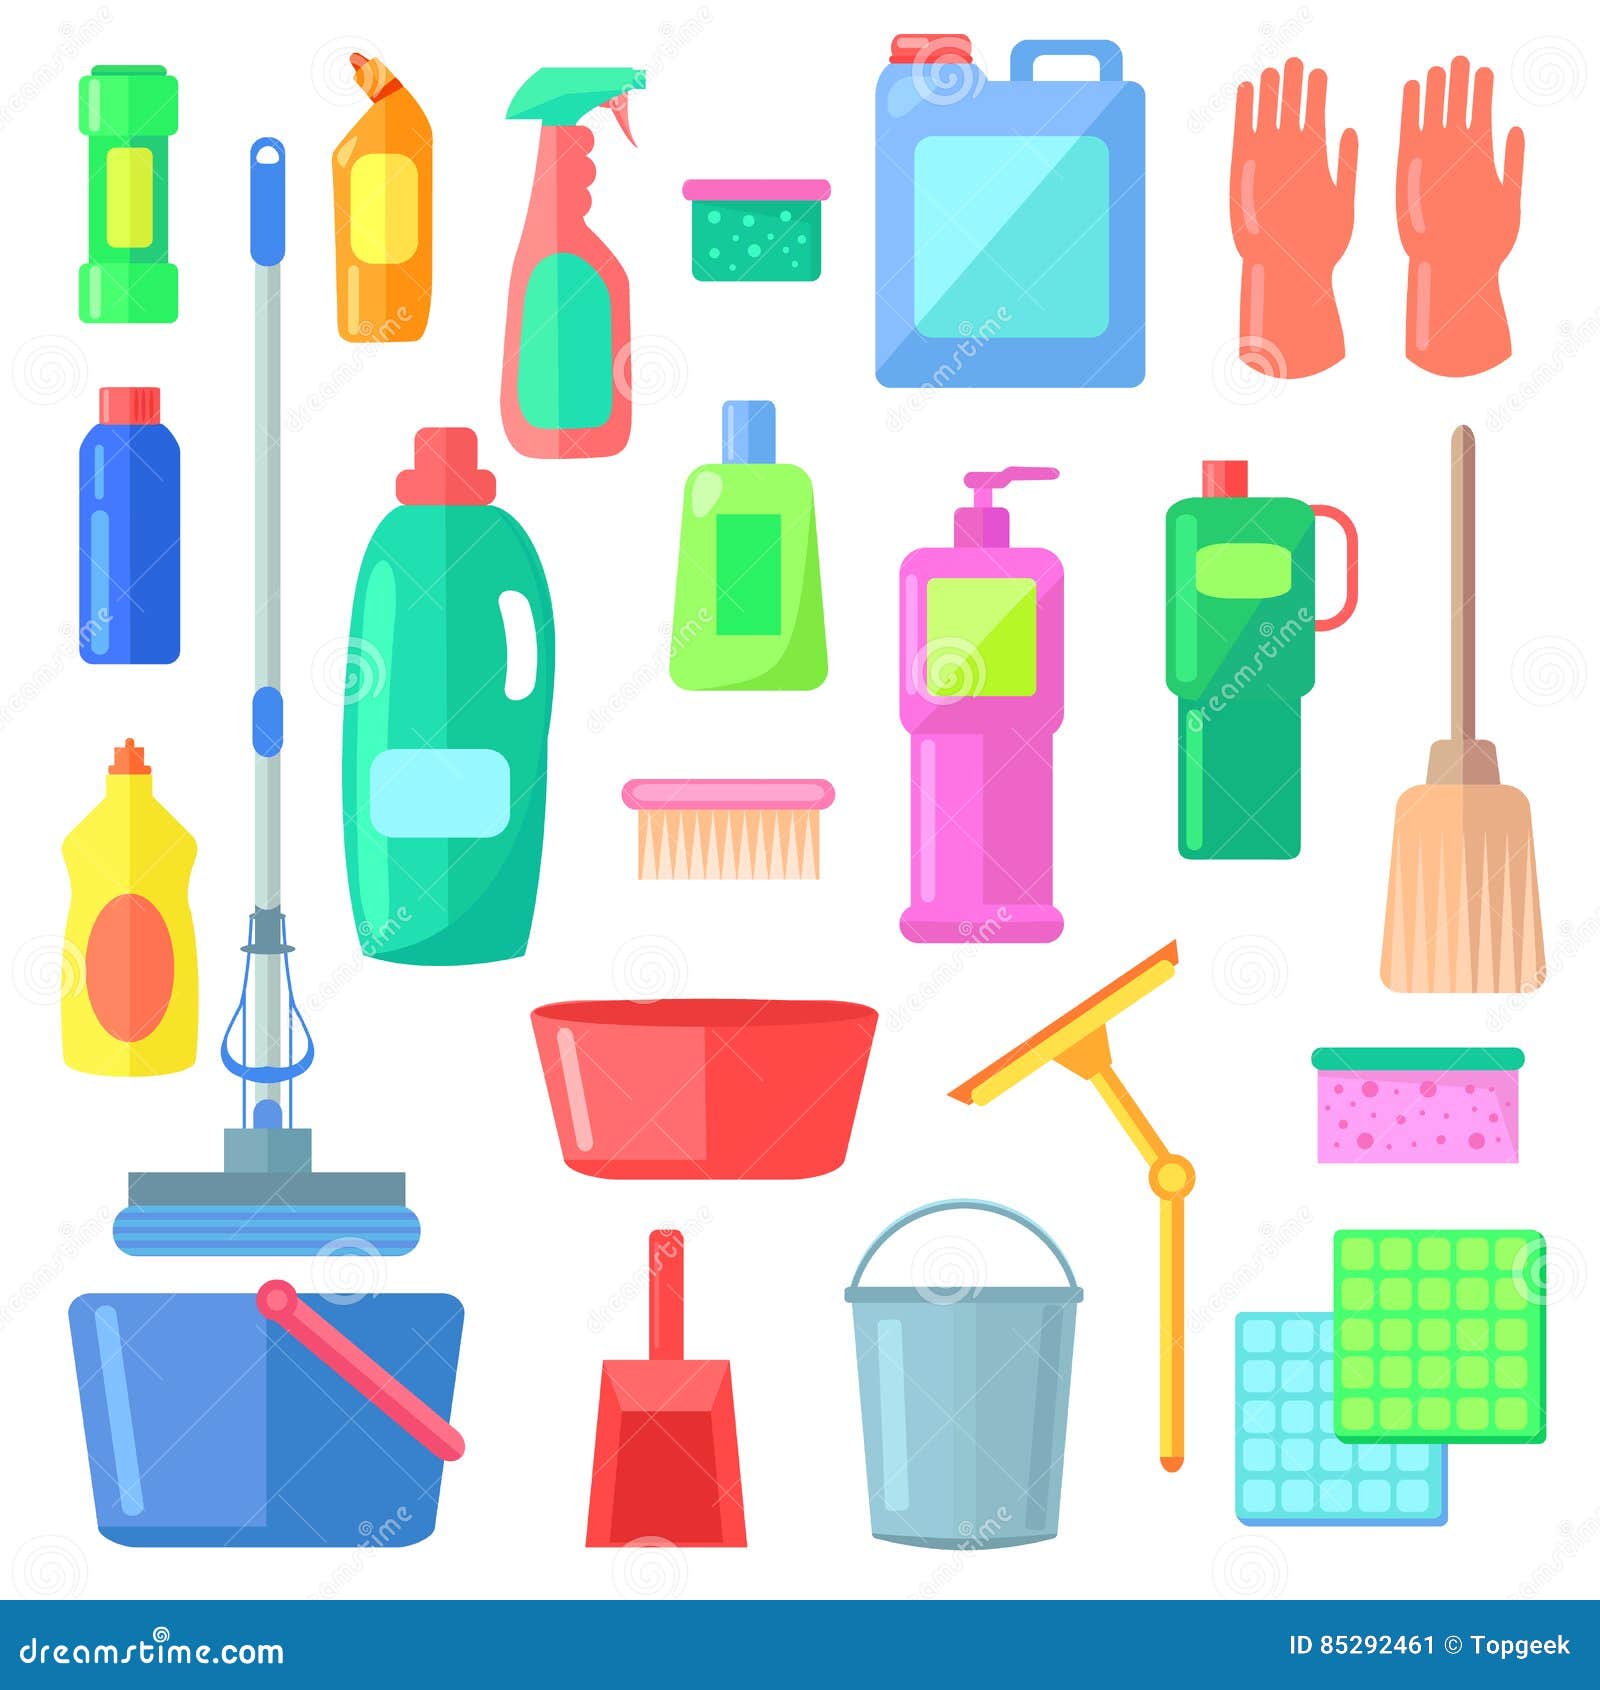 Cleaning supplies. Home clean tools. Brush, bucket window wipes